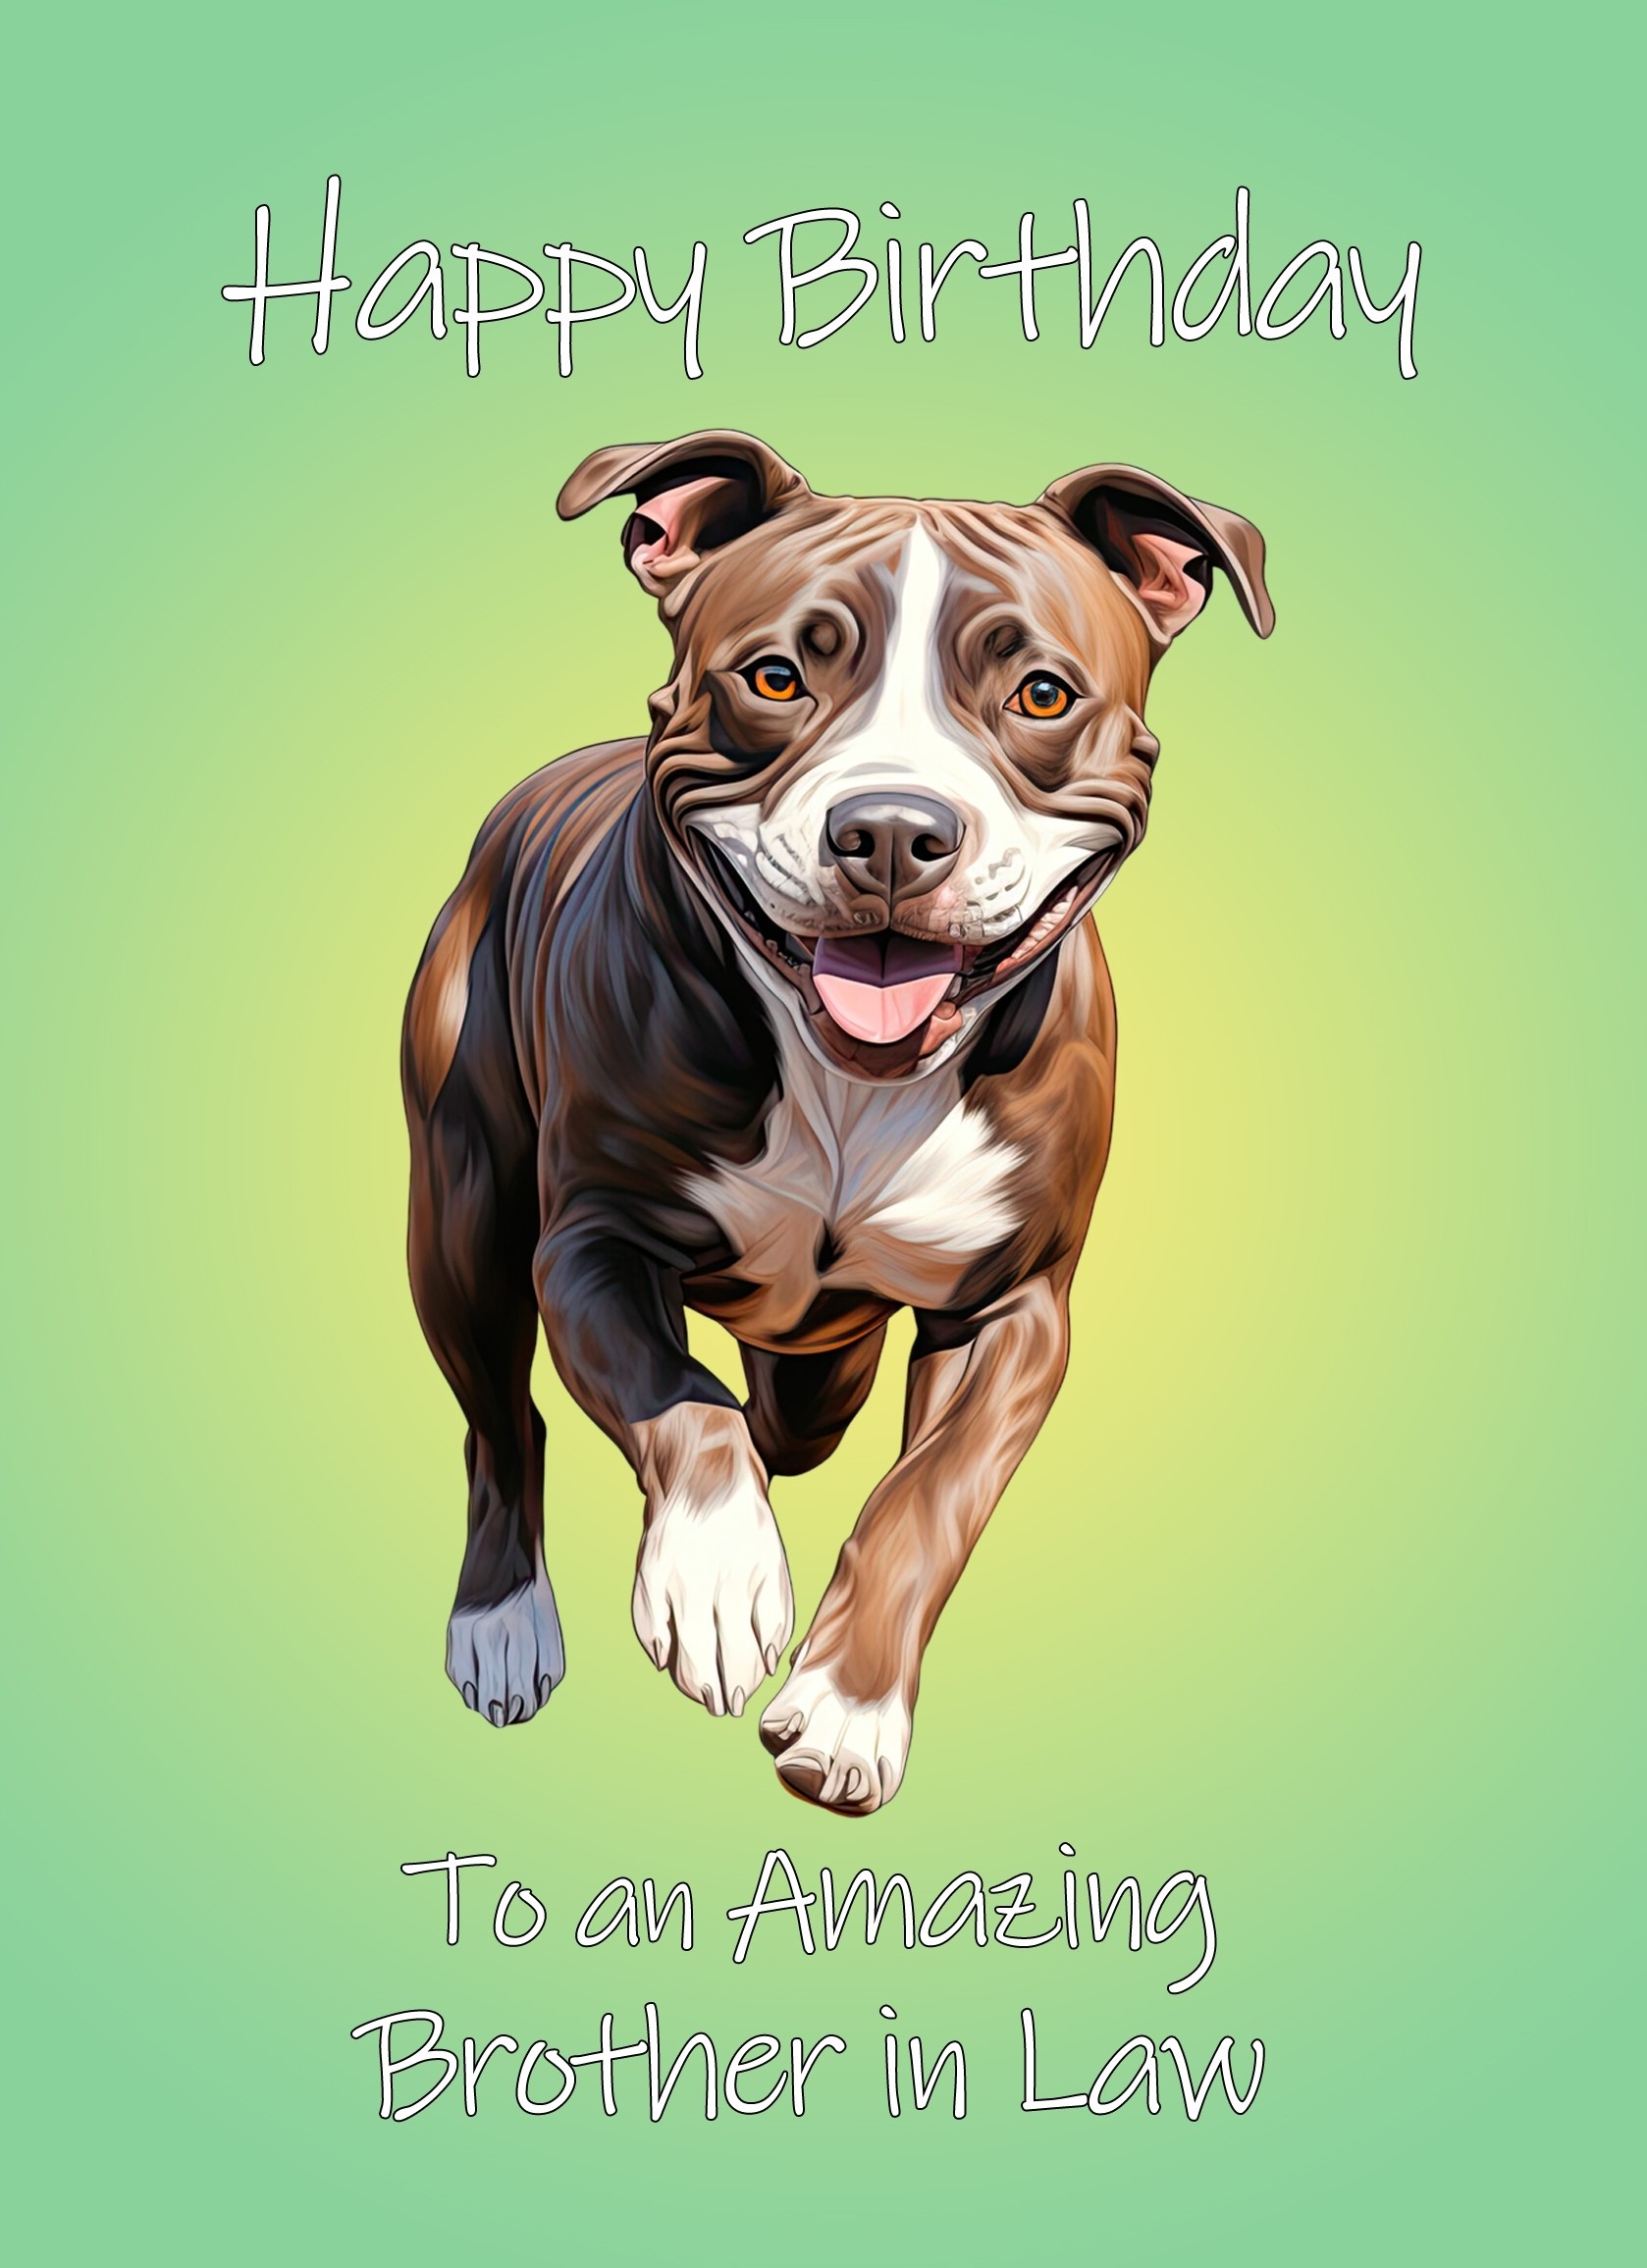 Staffordshire Bull Terrier Dog Birthday Card For Brother in Law